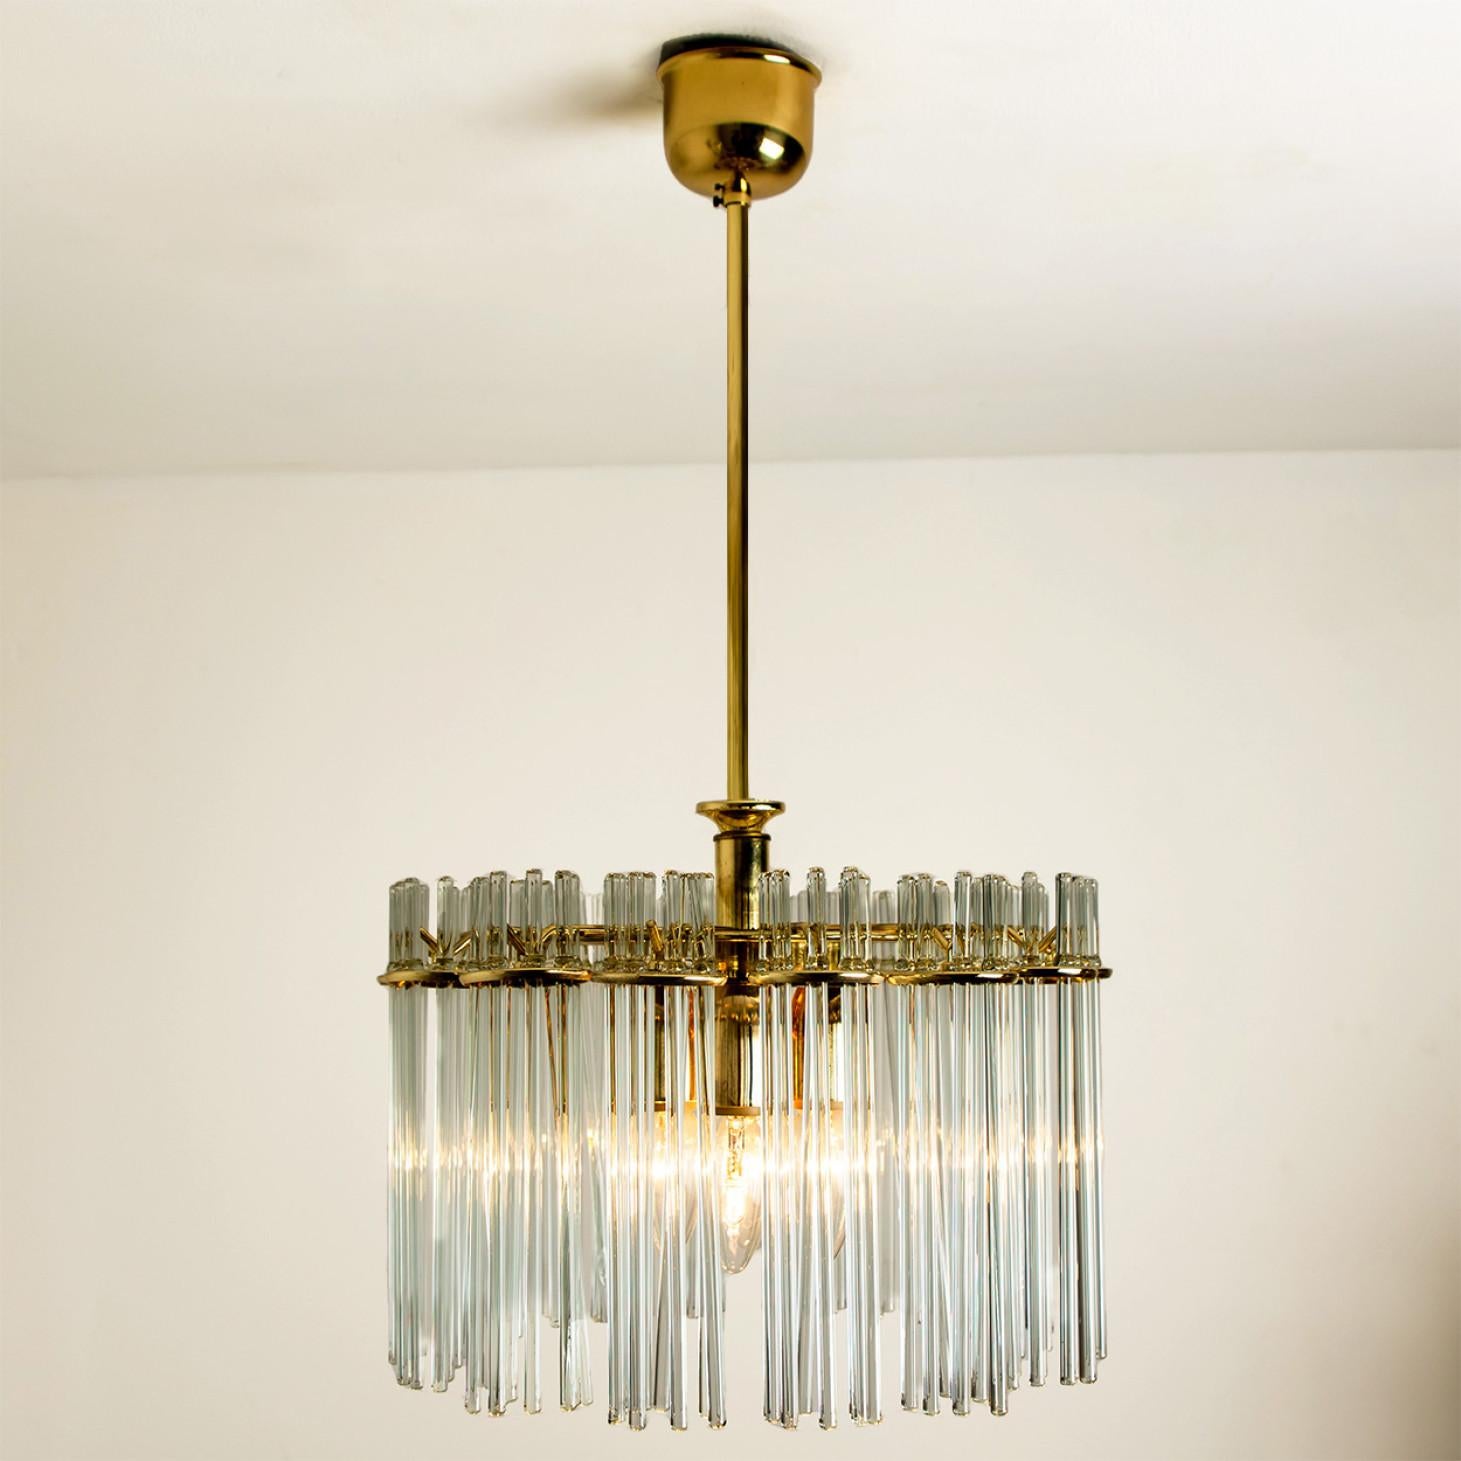 Clean lines to complement all decors. Wonderful high-end light fixture by Sciolari for Lightolier. With brass detail hanging glass giving the piece an elegant appearance which refracts the light, filling a room with a soft, warm glow

The chandelier